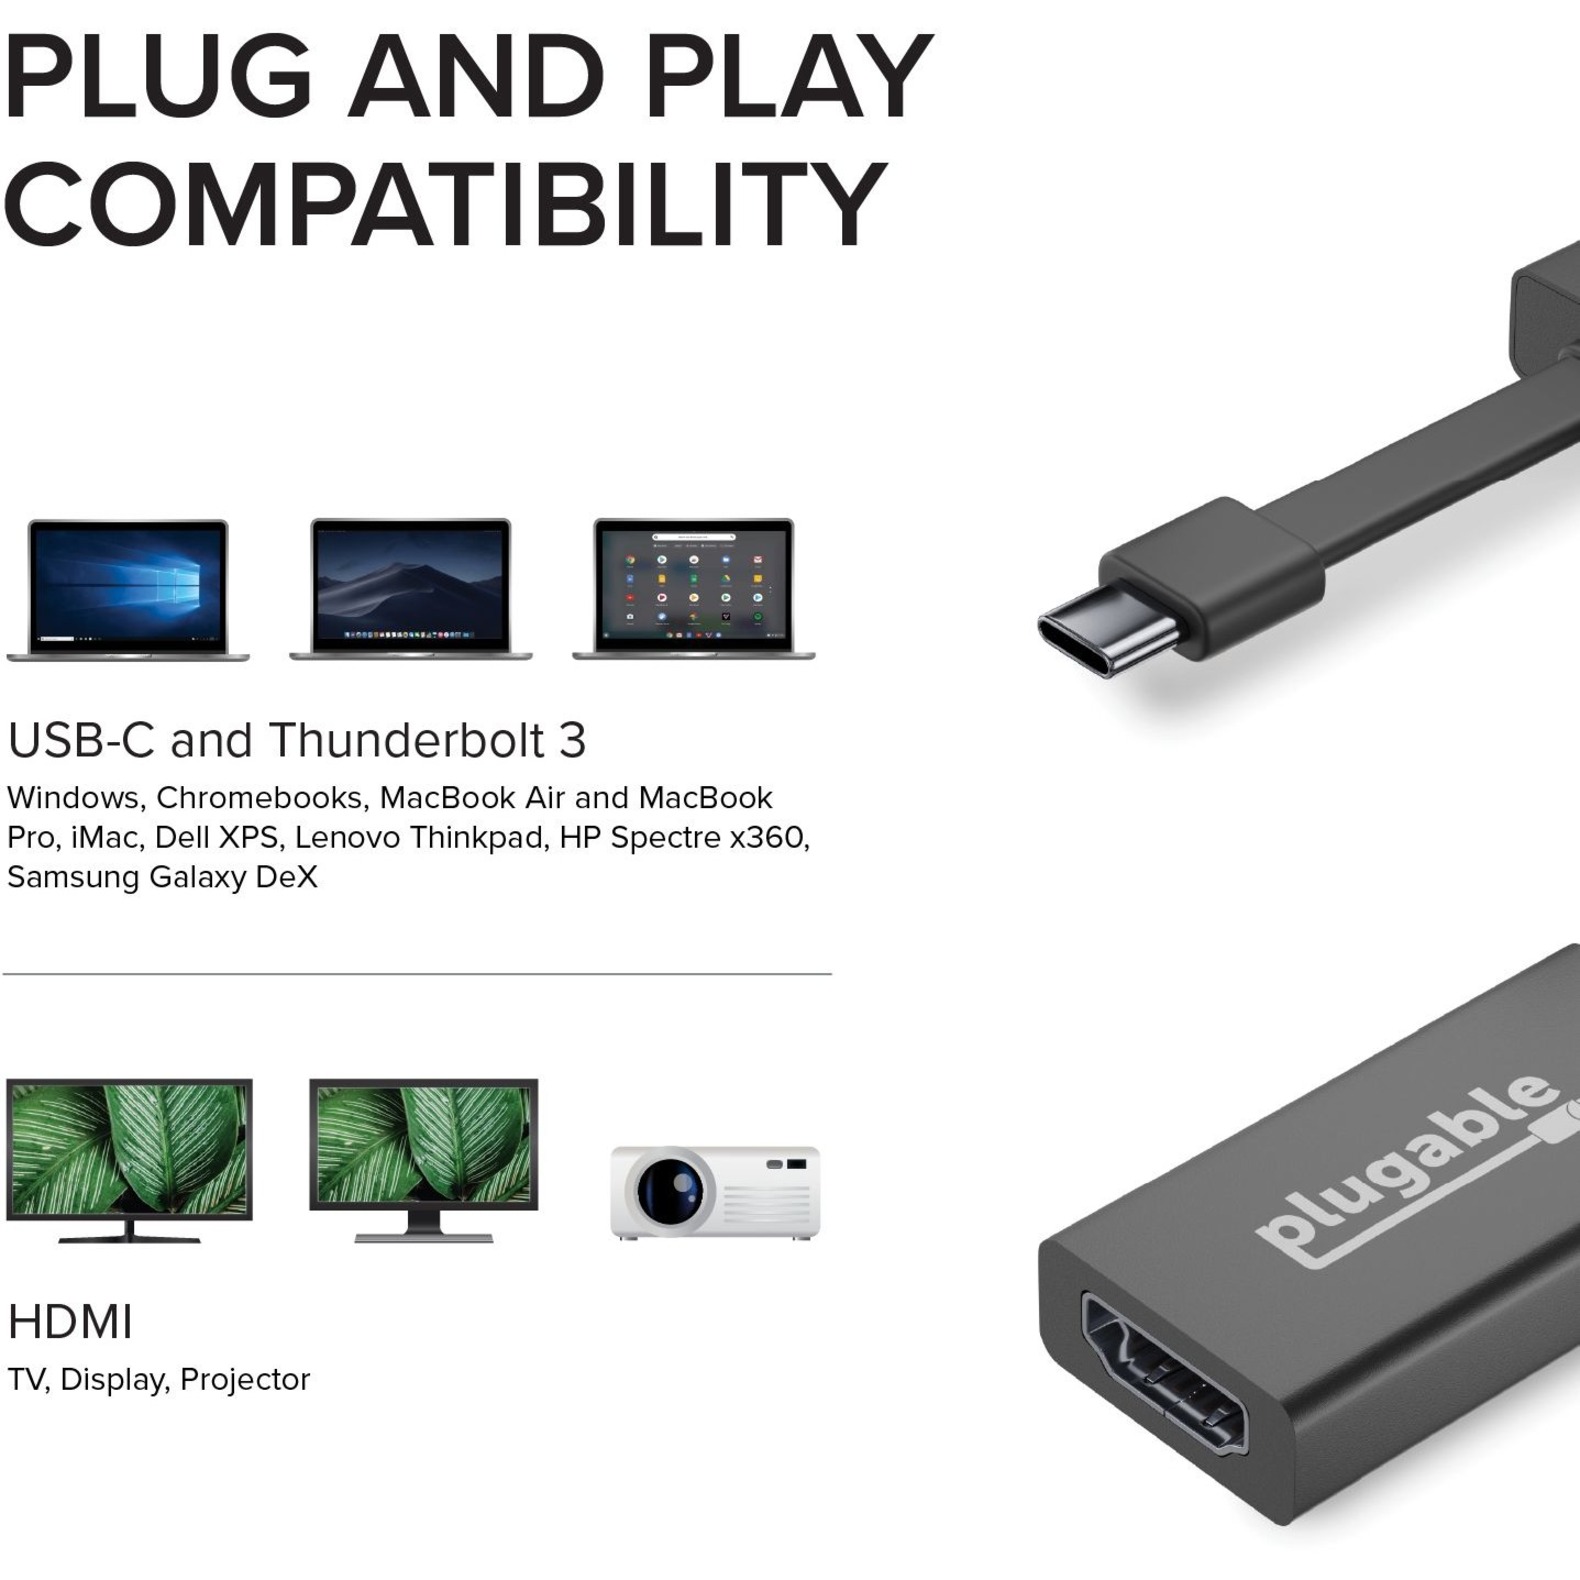 Plugable USB C to HDMI Adapter 4K 30Hz, Thunderbolt 3 to HDMI Adapter Compatible with MacBook Pro, Windows, Chromebooks, 2018+ iPad Pro, Dell XPS, Thunderbolt 3 Ports and more - image 3 of 6